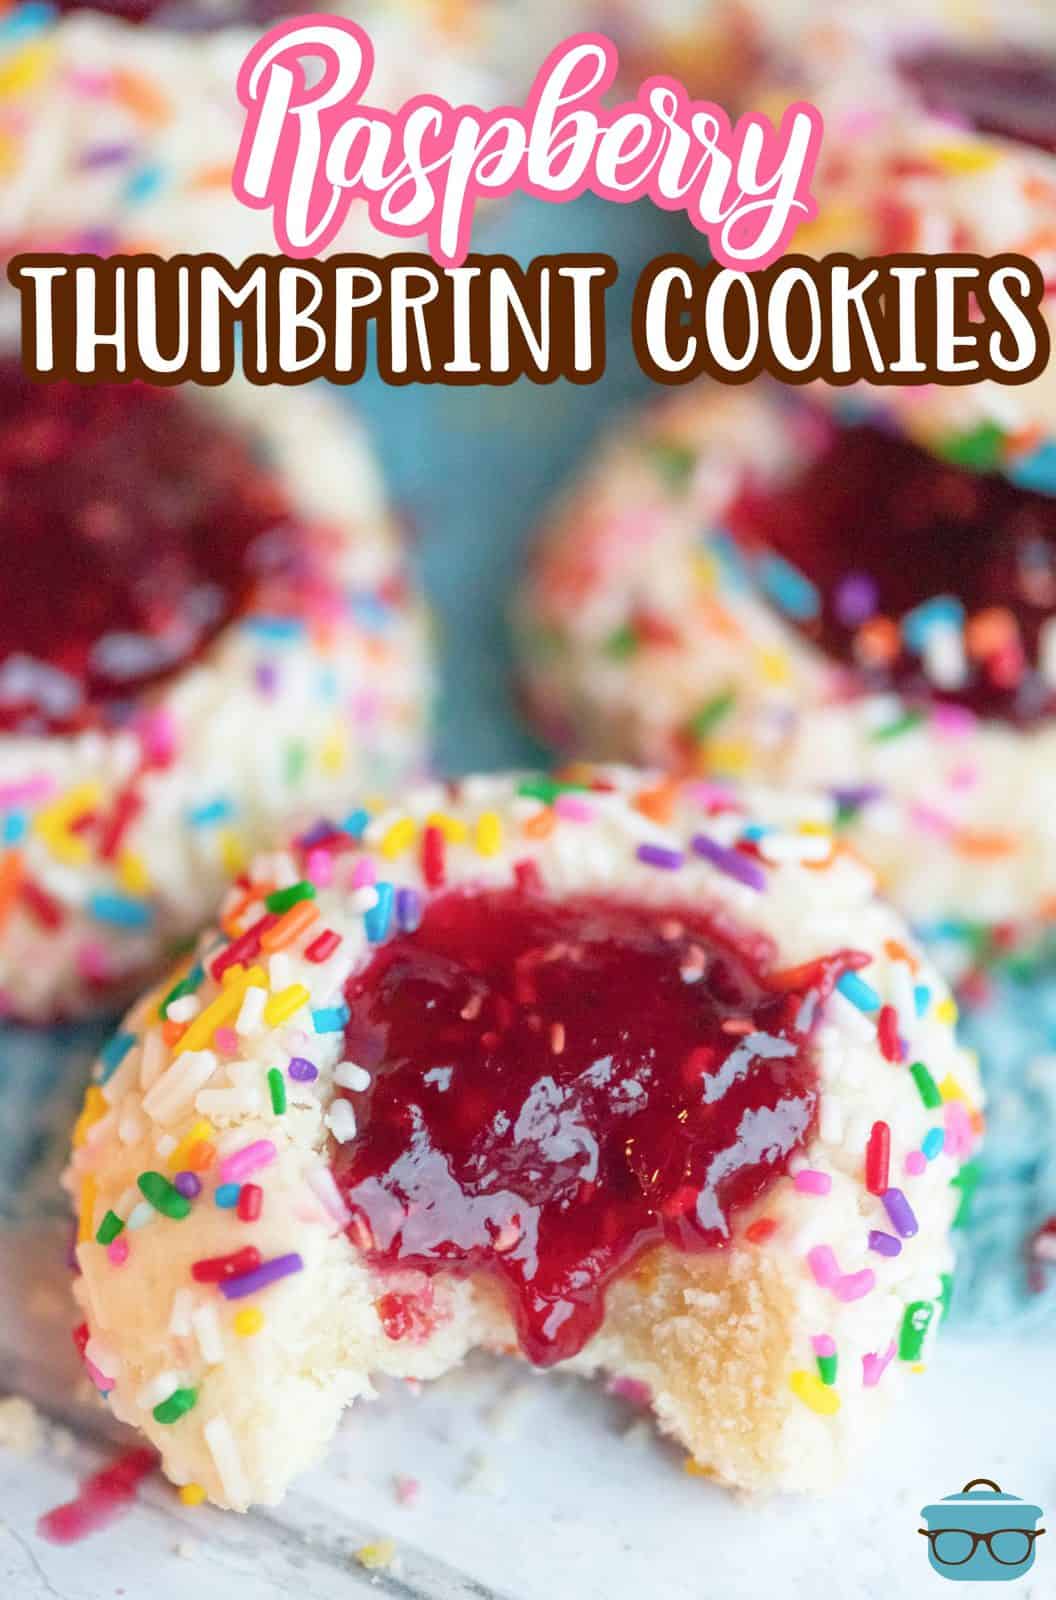 Pinterest image of Raspberry Thumbprint Cookies overhead with bite taken out of one.